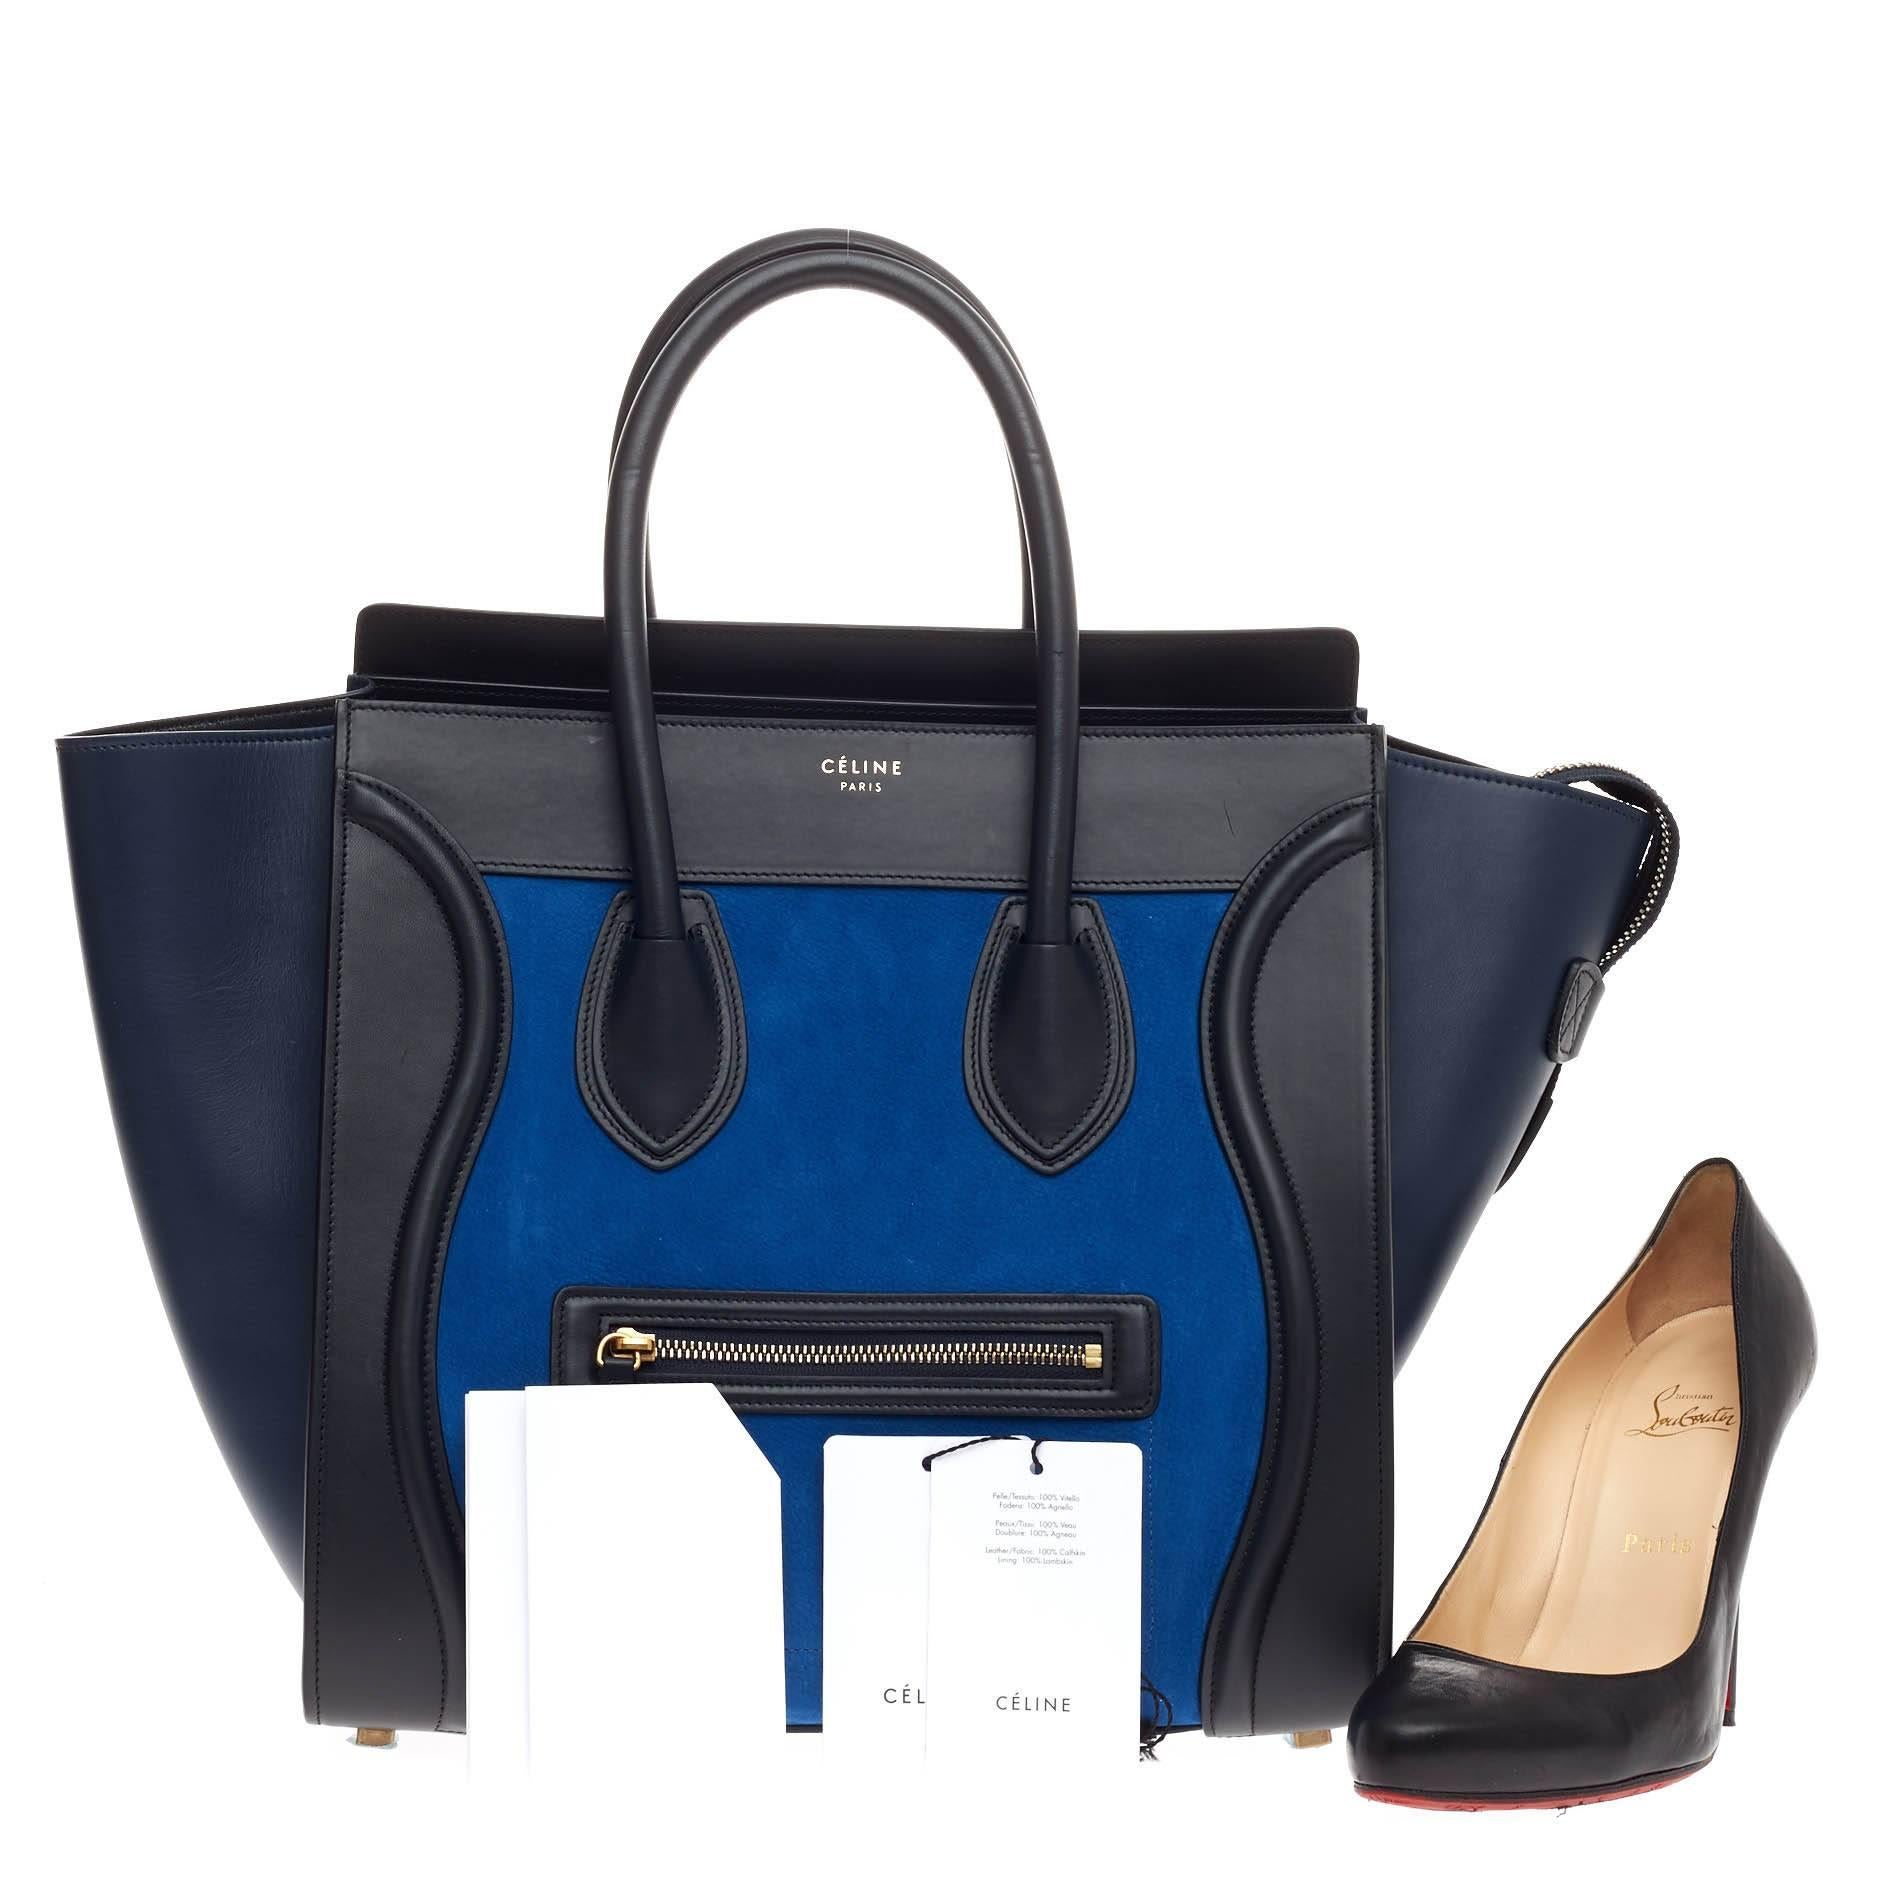 This authentic Celine Tricolor Luggage Nubuck Mini presented in the brand's Fall/Winter 2014 Collection showcases an elegant day-to-day style essential for any fashionista. Constructed with tricolor shades of black and navy blue leather with a